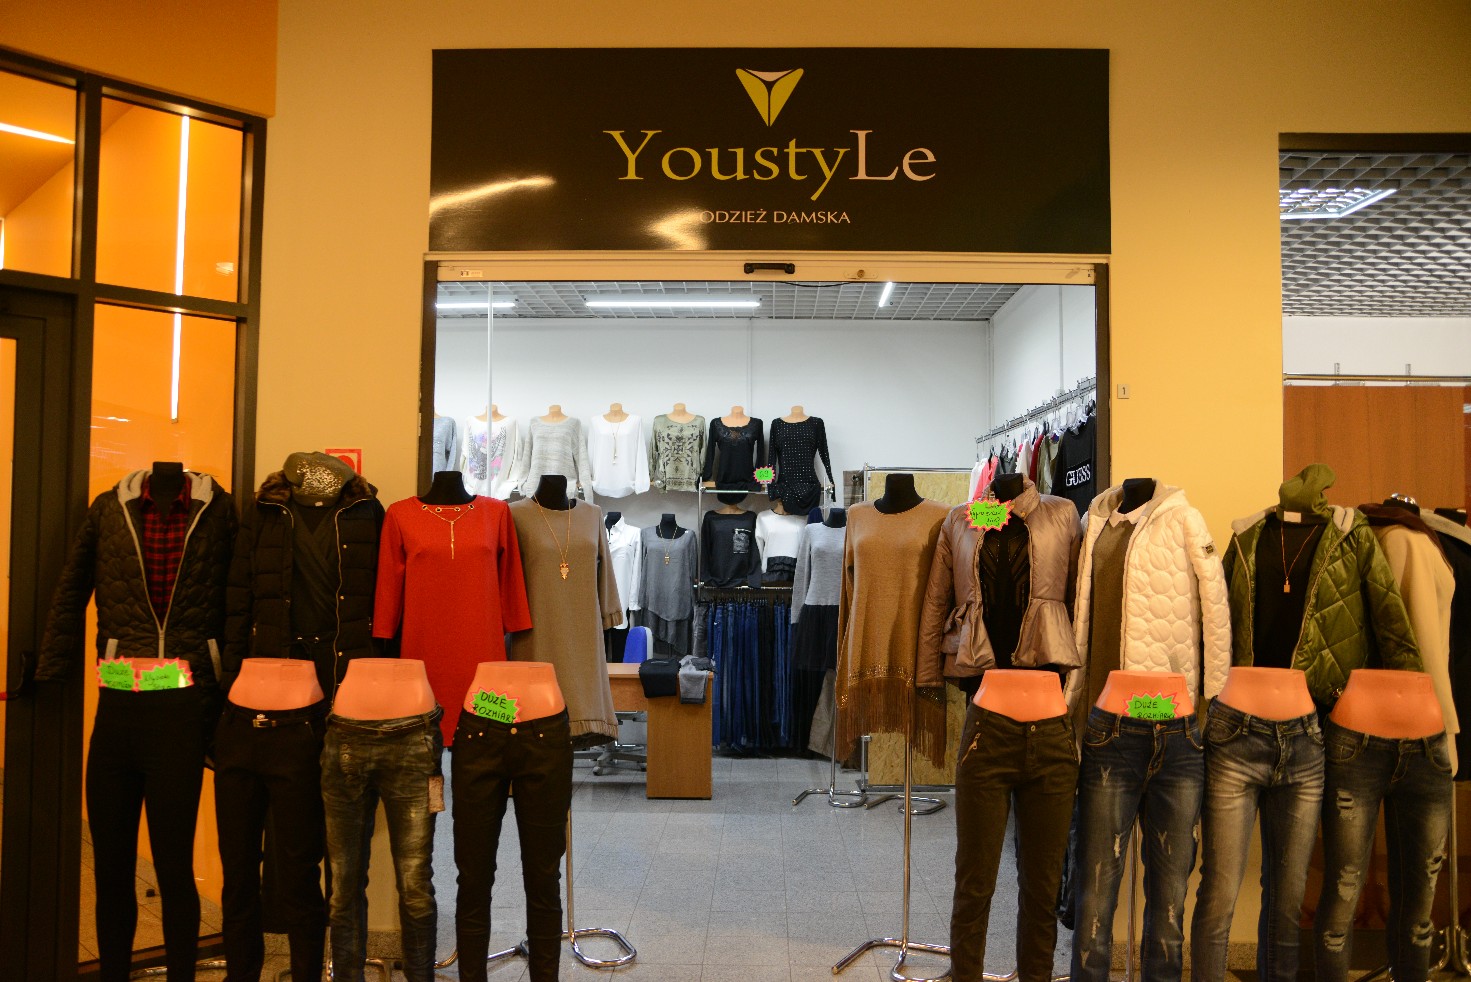 Youstyle